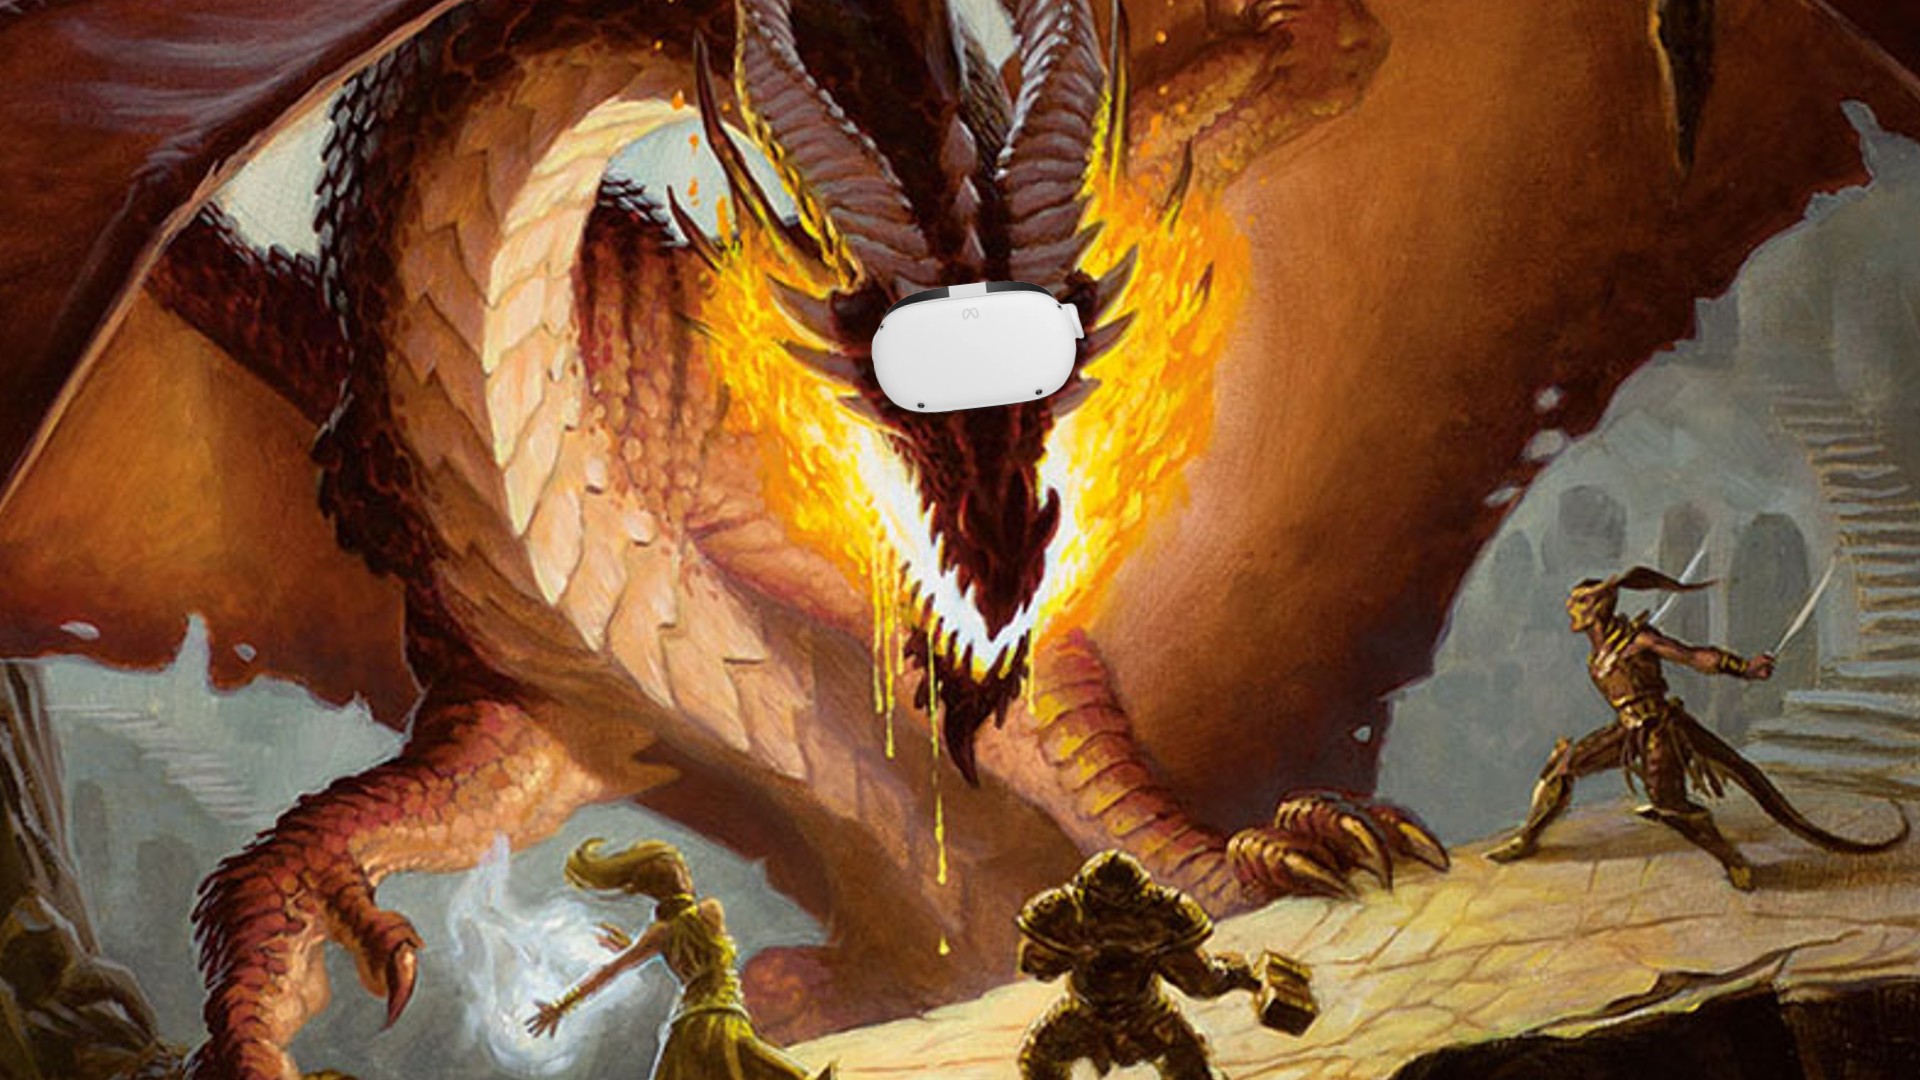 D&D is coming to VR, and there couldn't be a better studio in charge